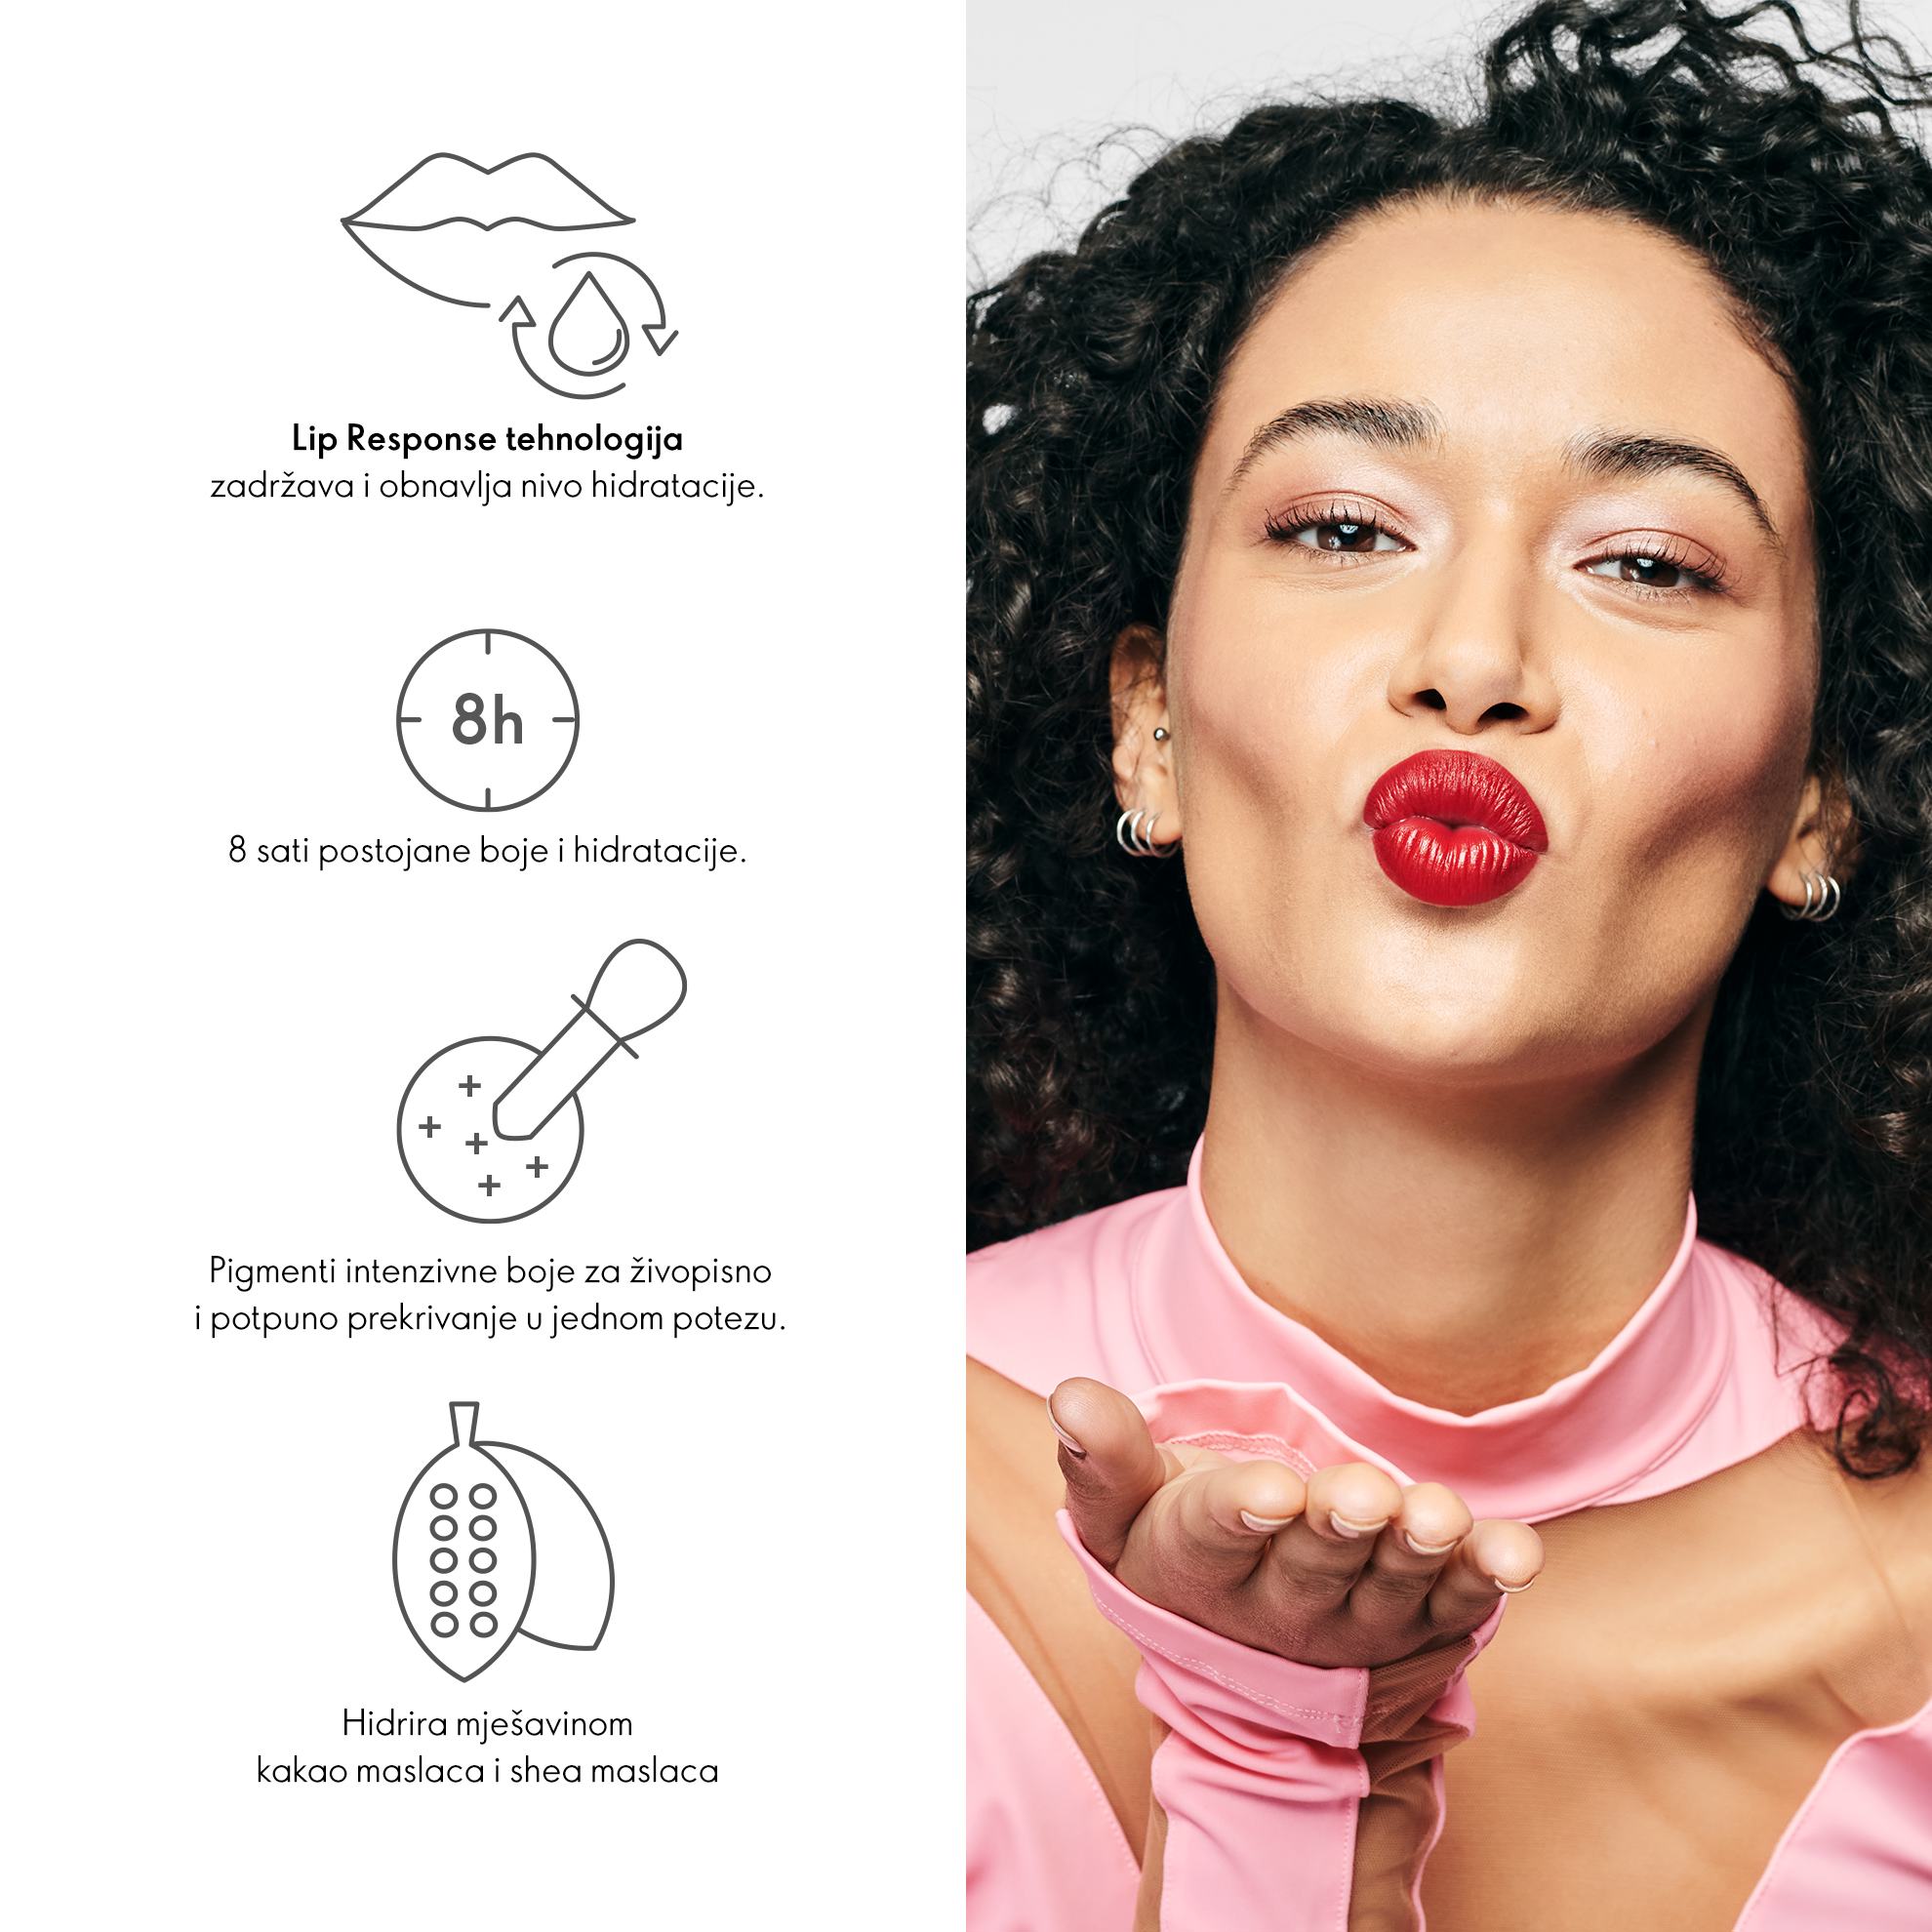 https://media-cdn.oriflame.com/productImage?externalMediaId=product-management-media%2fProducts%2f46442%2fBA%2f46442_2.png&id=18912929&version=3